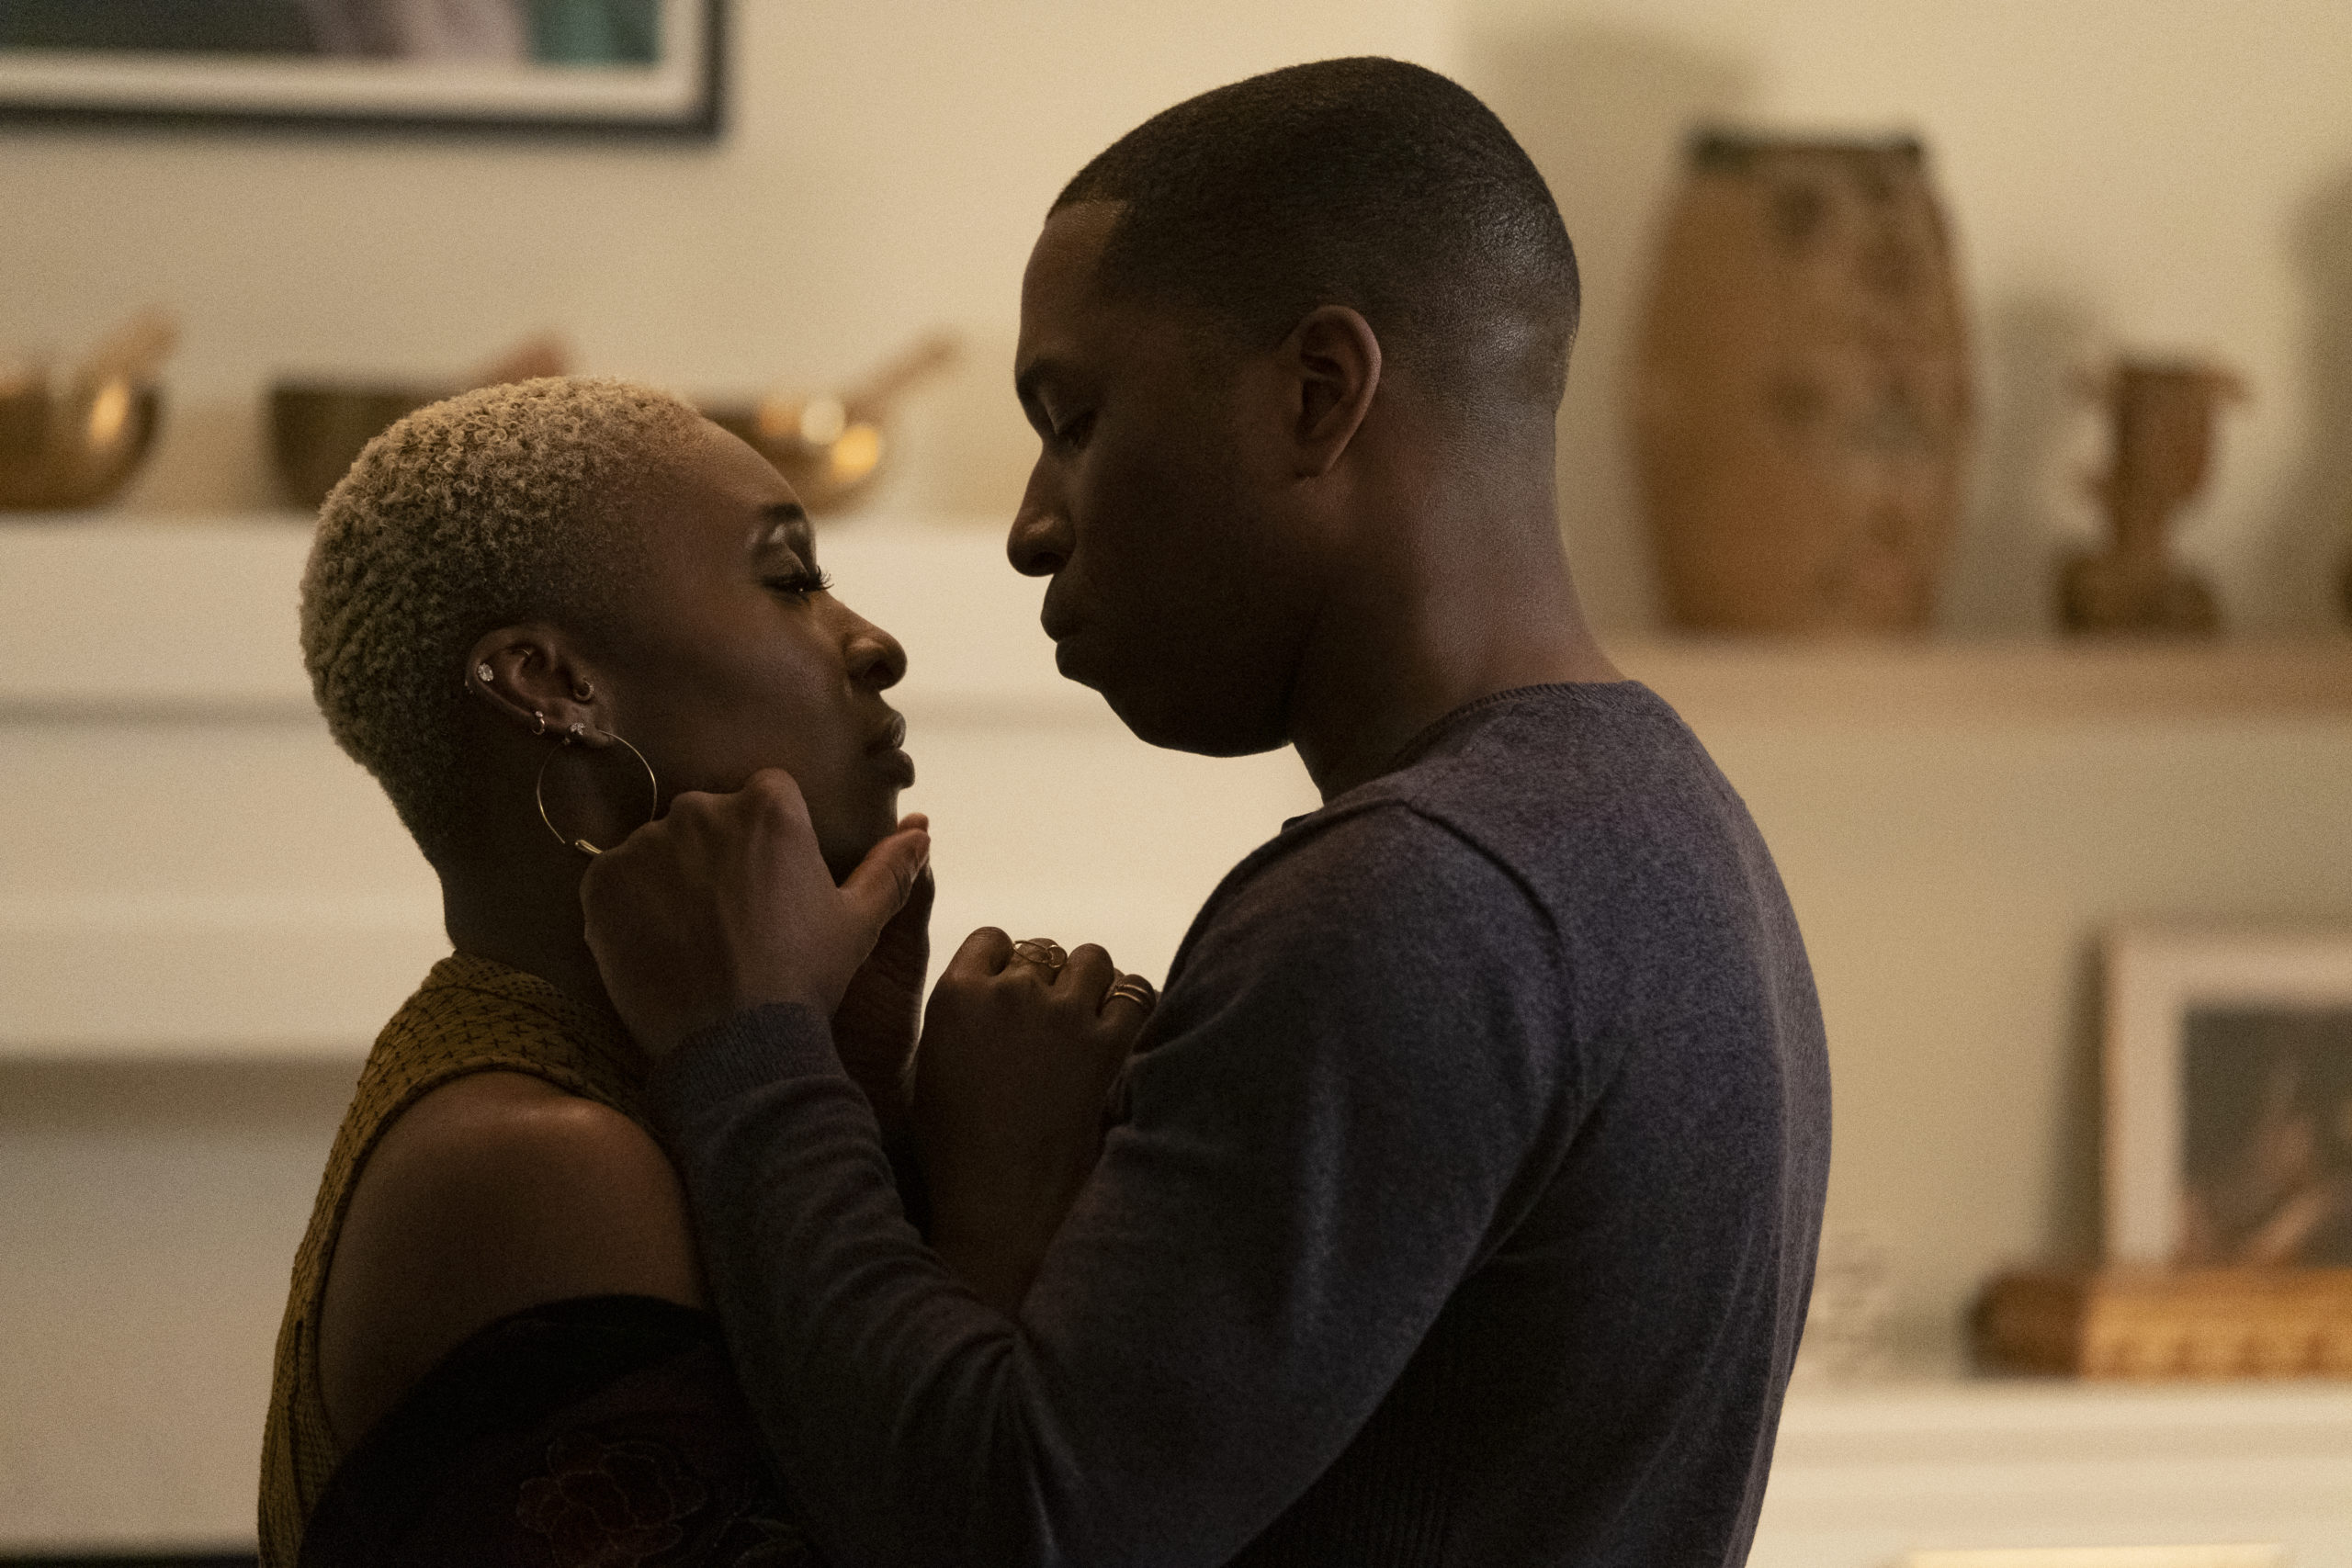 Needle in a Timestack with Leslie Odom Jr. and Cynthia Erivo